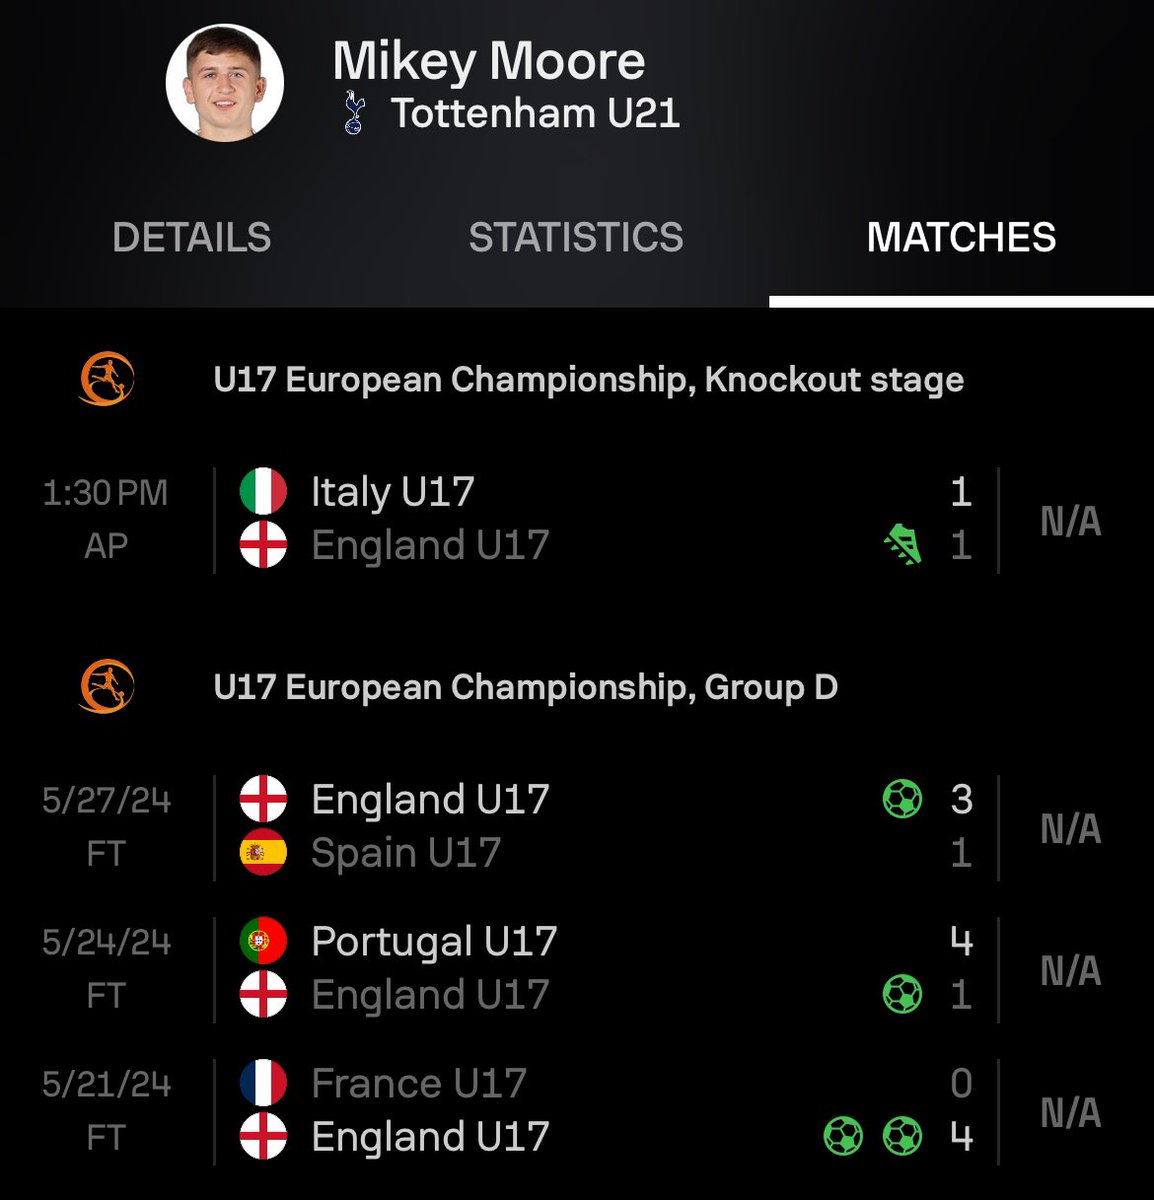 This is unheard of, Mikey Moore is unbelievable 🏴󠁧󠁢󠁥󠁮󠁧󠁿✨